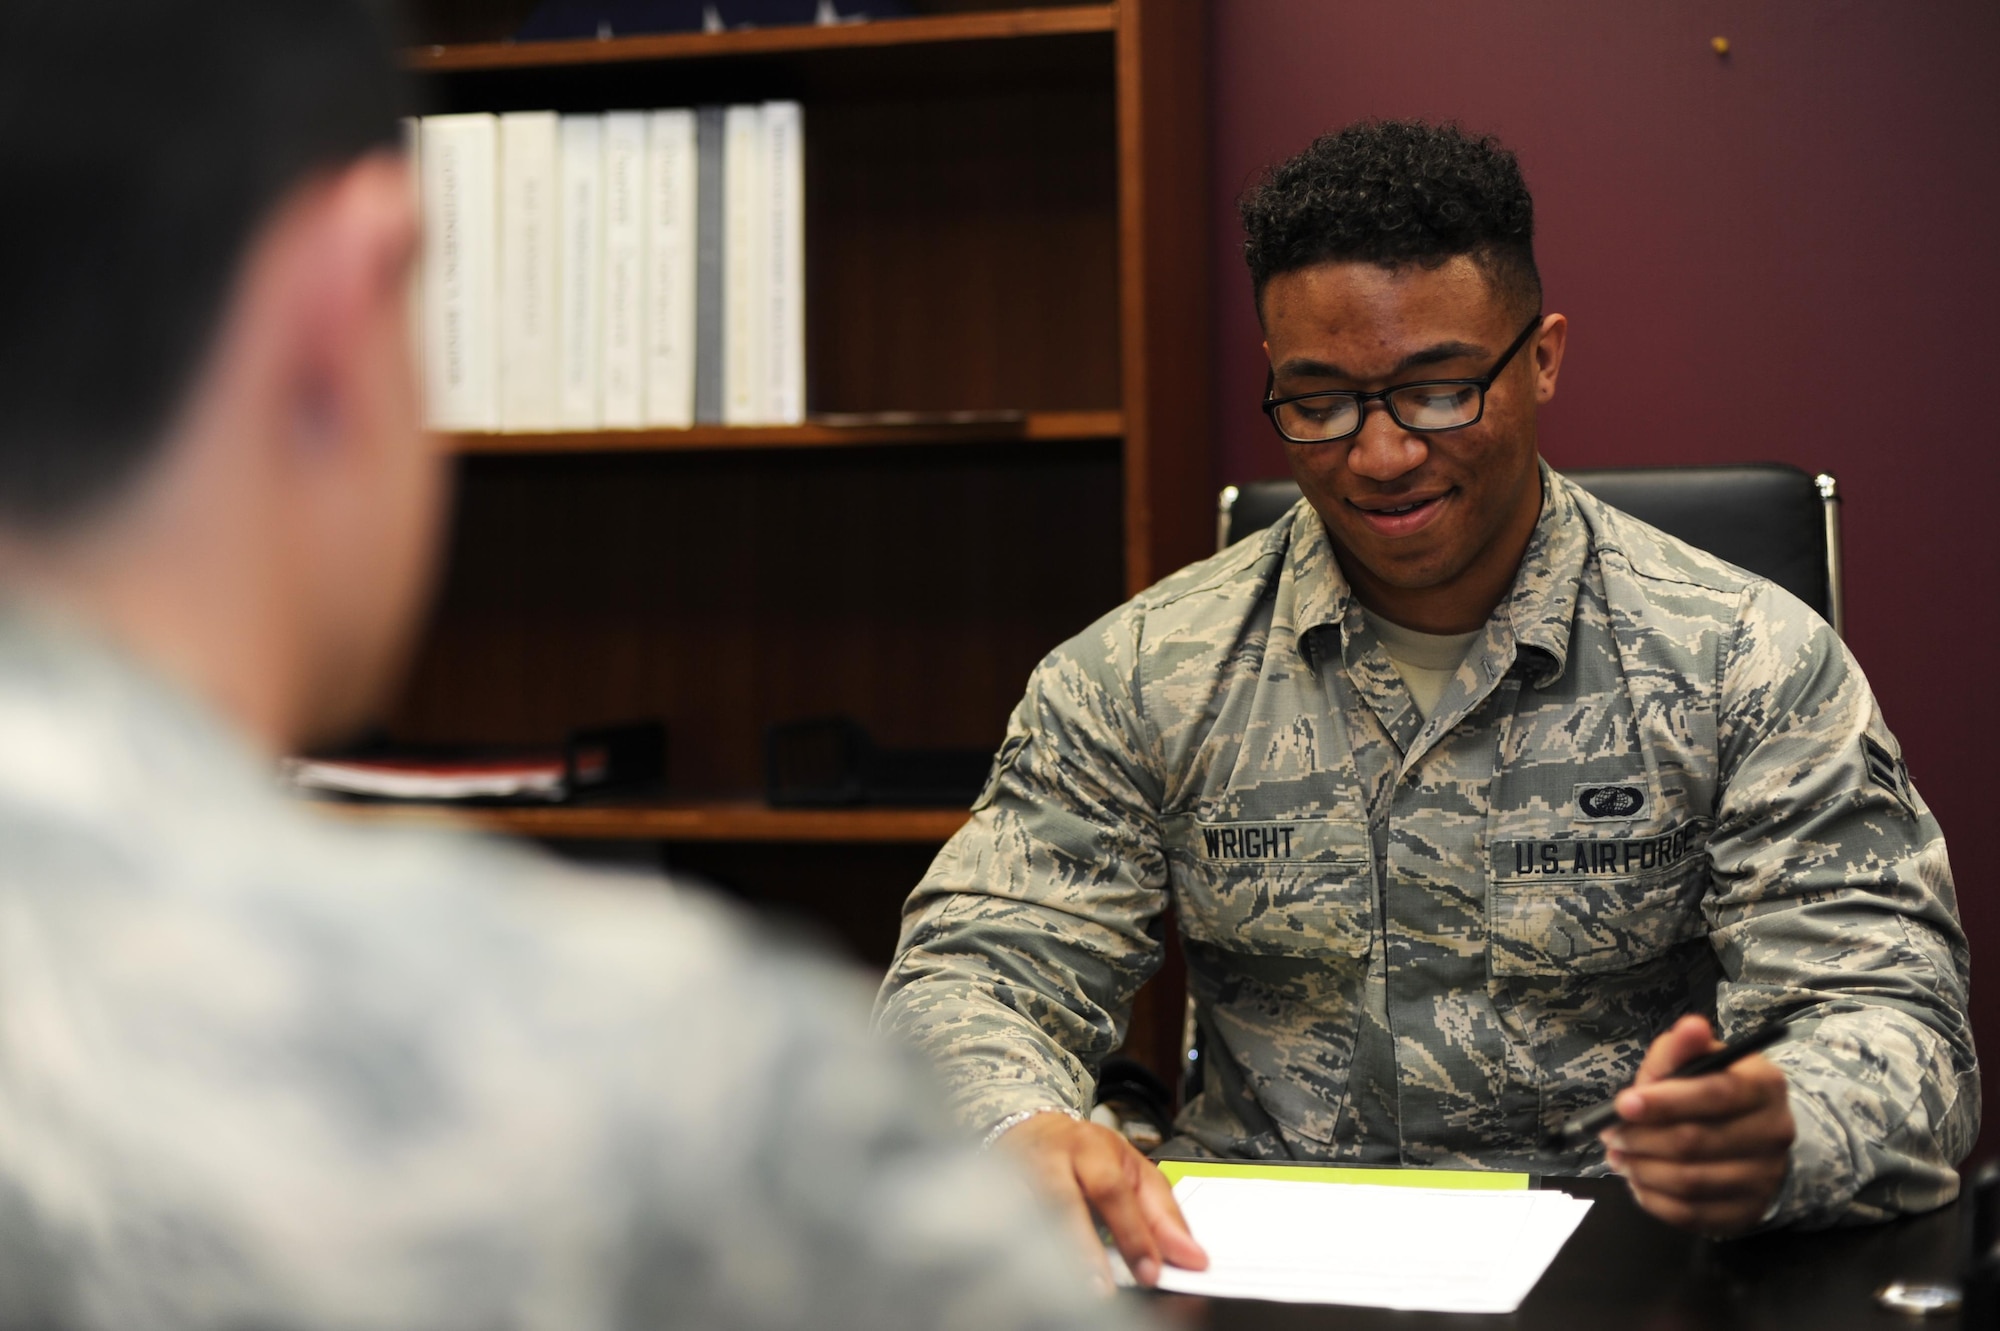 Airman 1st Class Rahsaan Wright, 19th Comptroller Squadron financial services technician, assists a customer May 9, 2017, at Little Rock Air Force Base, Ark. Wright was selected as the Combat Airlifter of the Week for his willingness to help his peers and putting customers first. (U.S. Air Force photo by Airman 1st Class Grace Nichols)